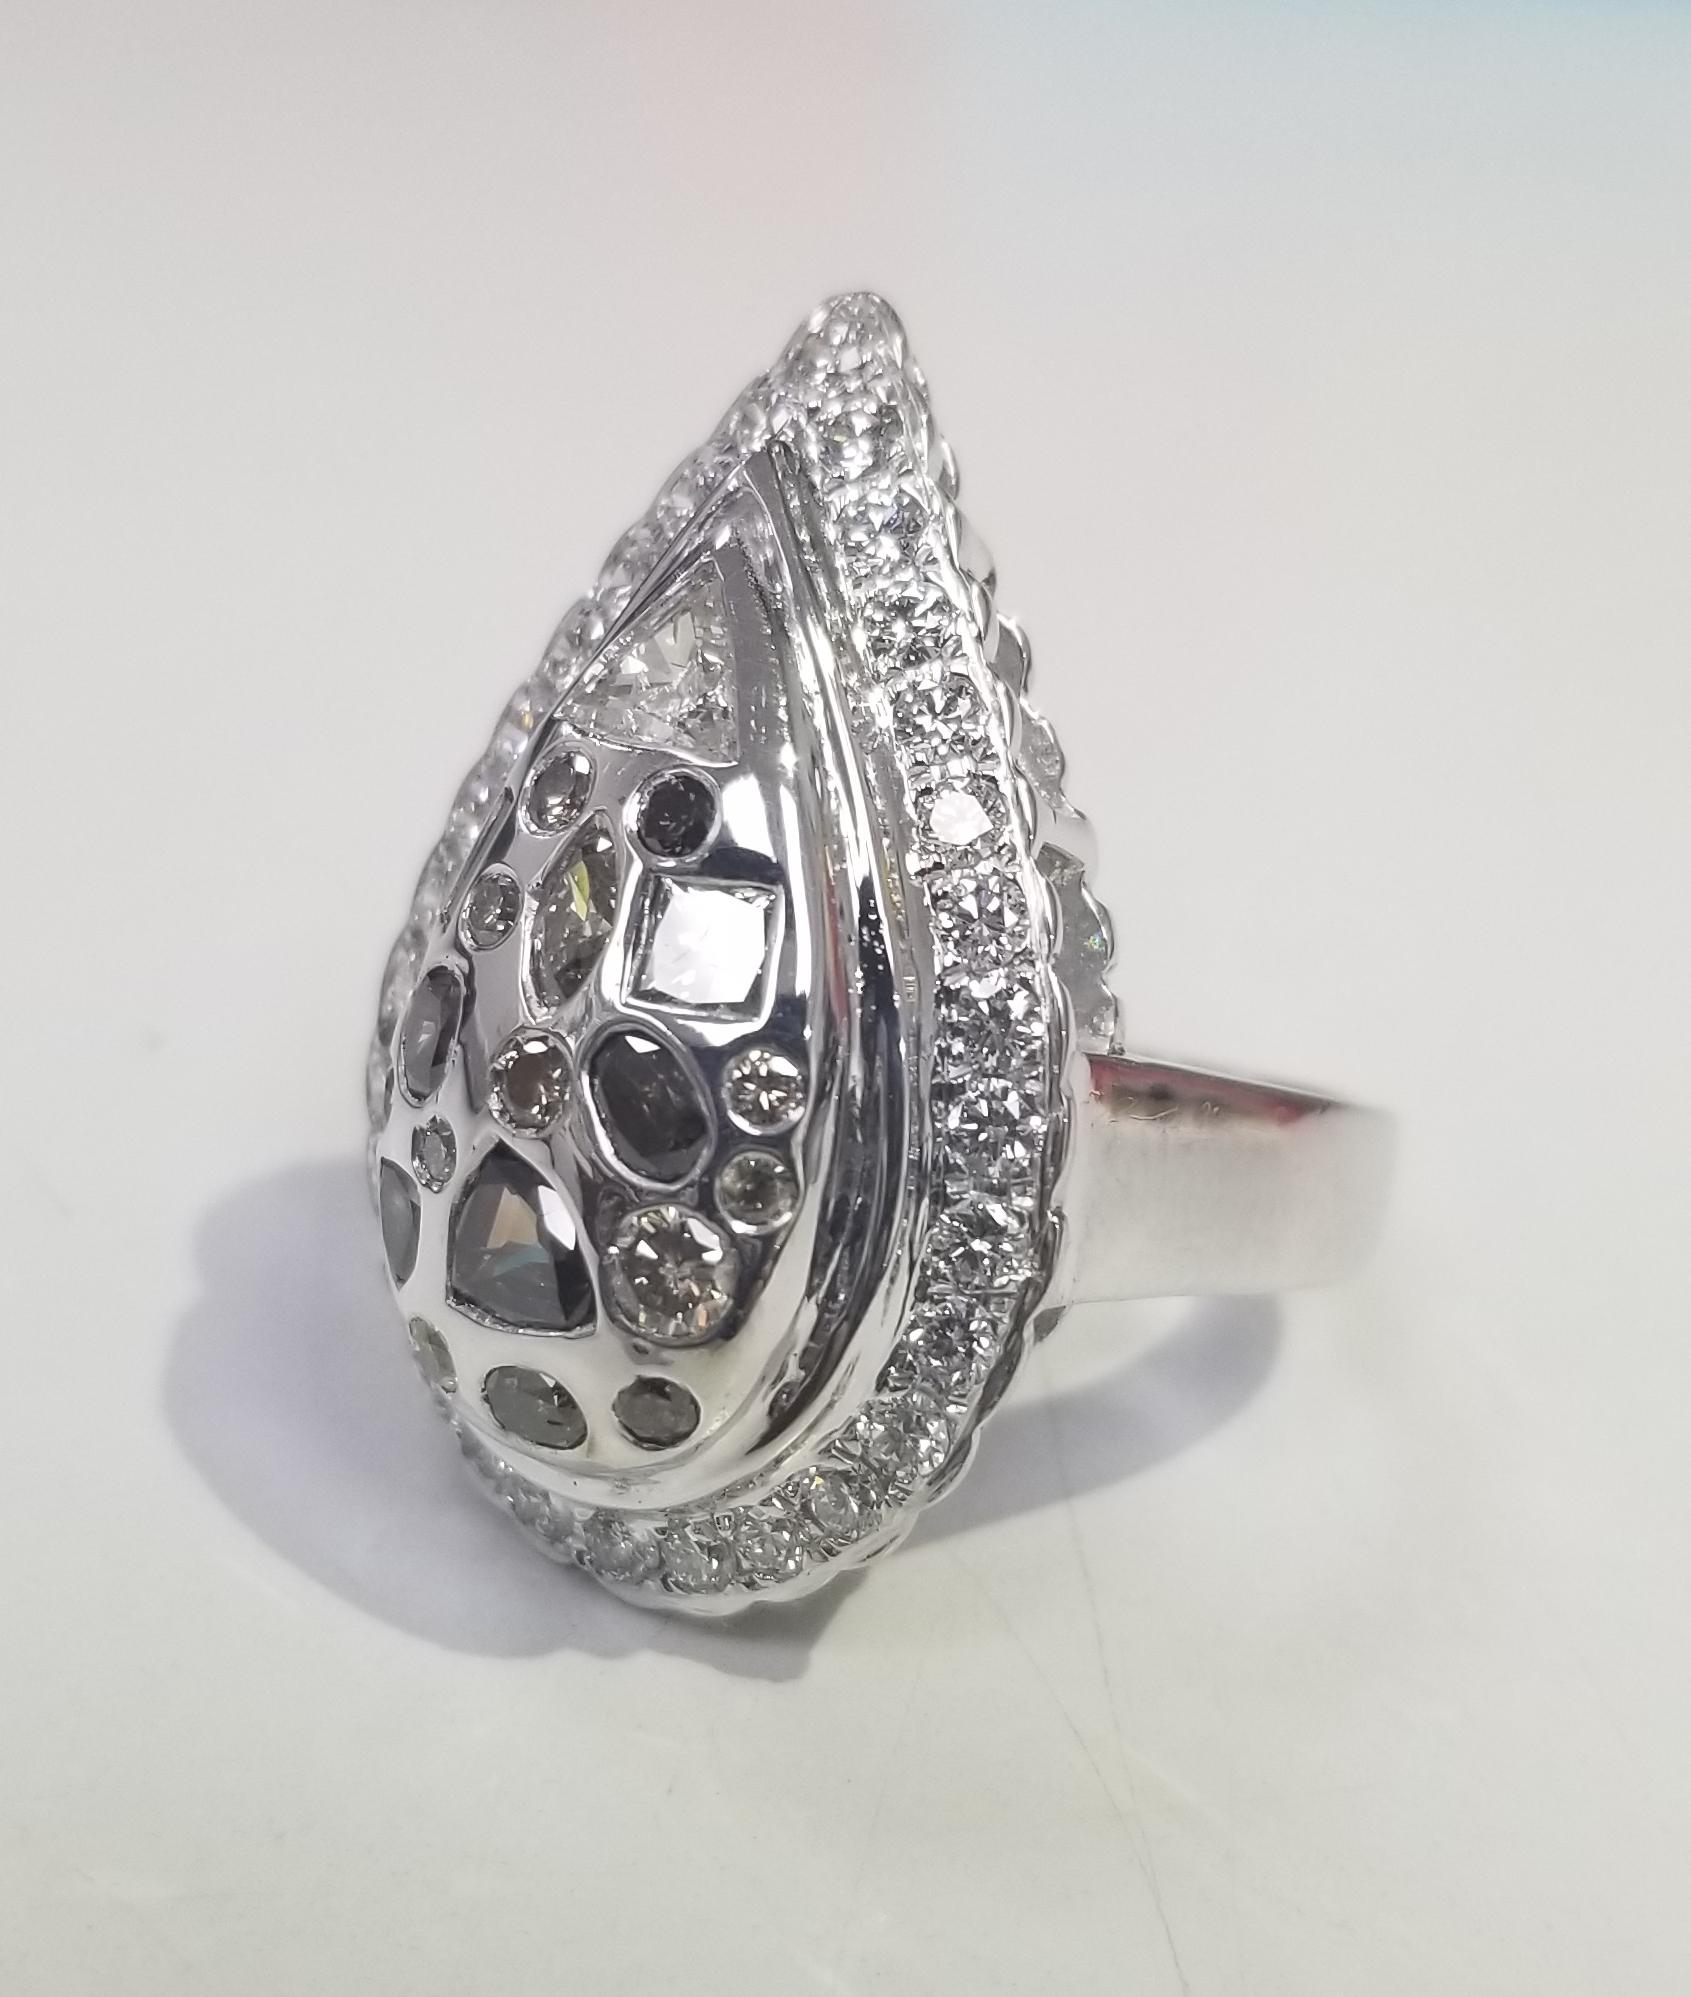 14k white gold pear shape setting with 30 round full cut diamonds of very fine quality weighing .90pts. set with 10 natural diamonds; white, yellow and brown weighing 1.28cts. ring size is 7 